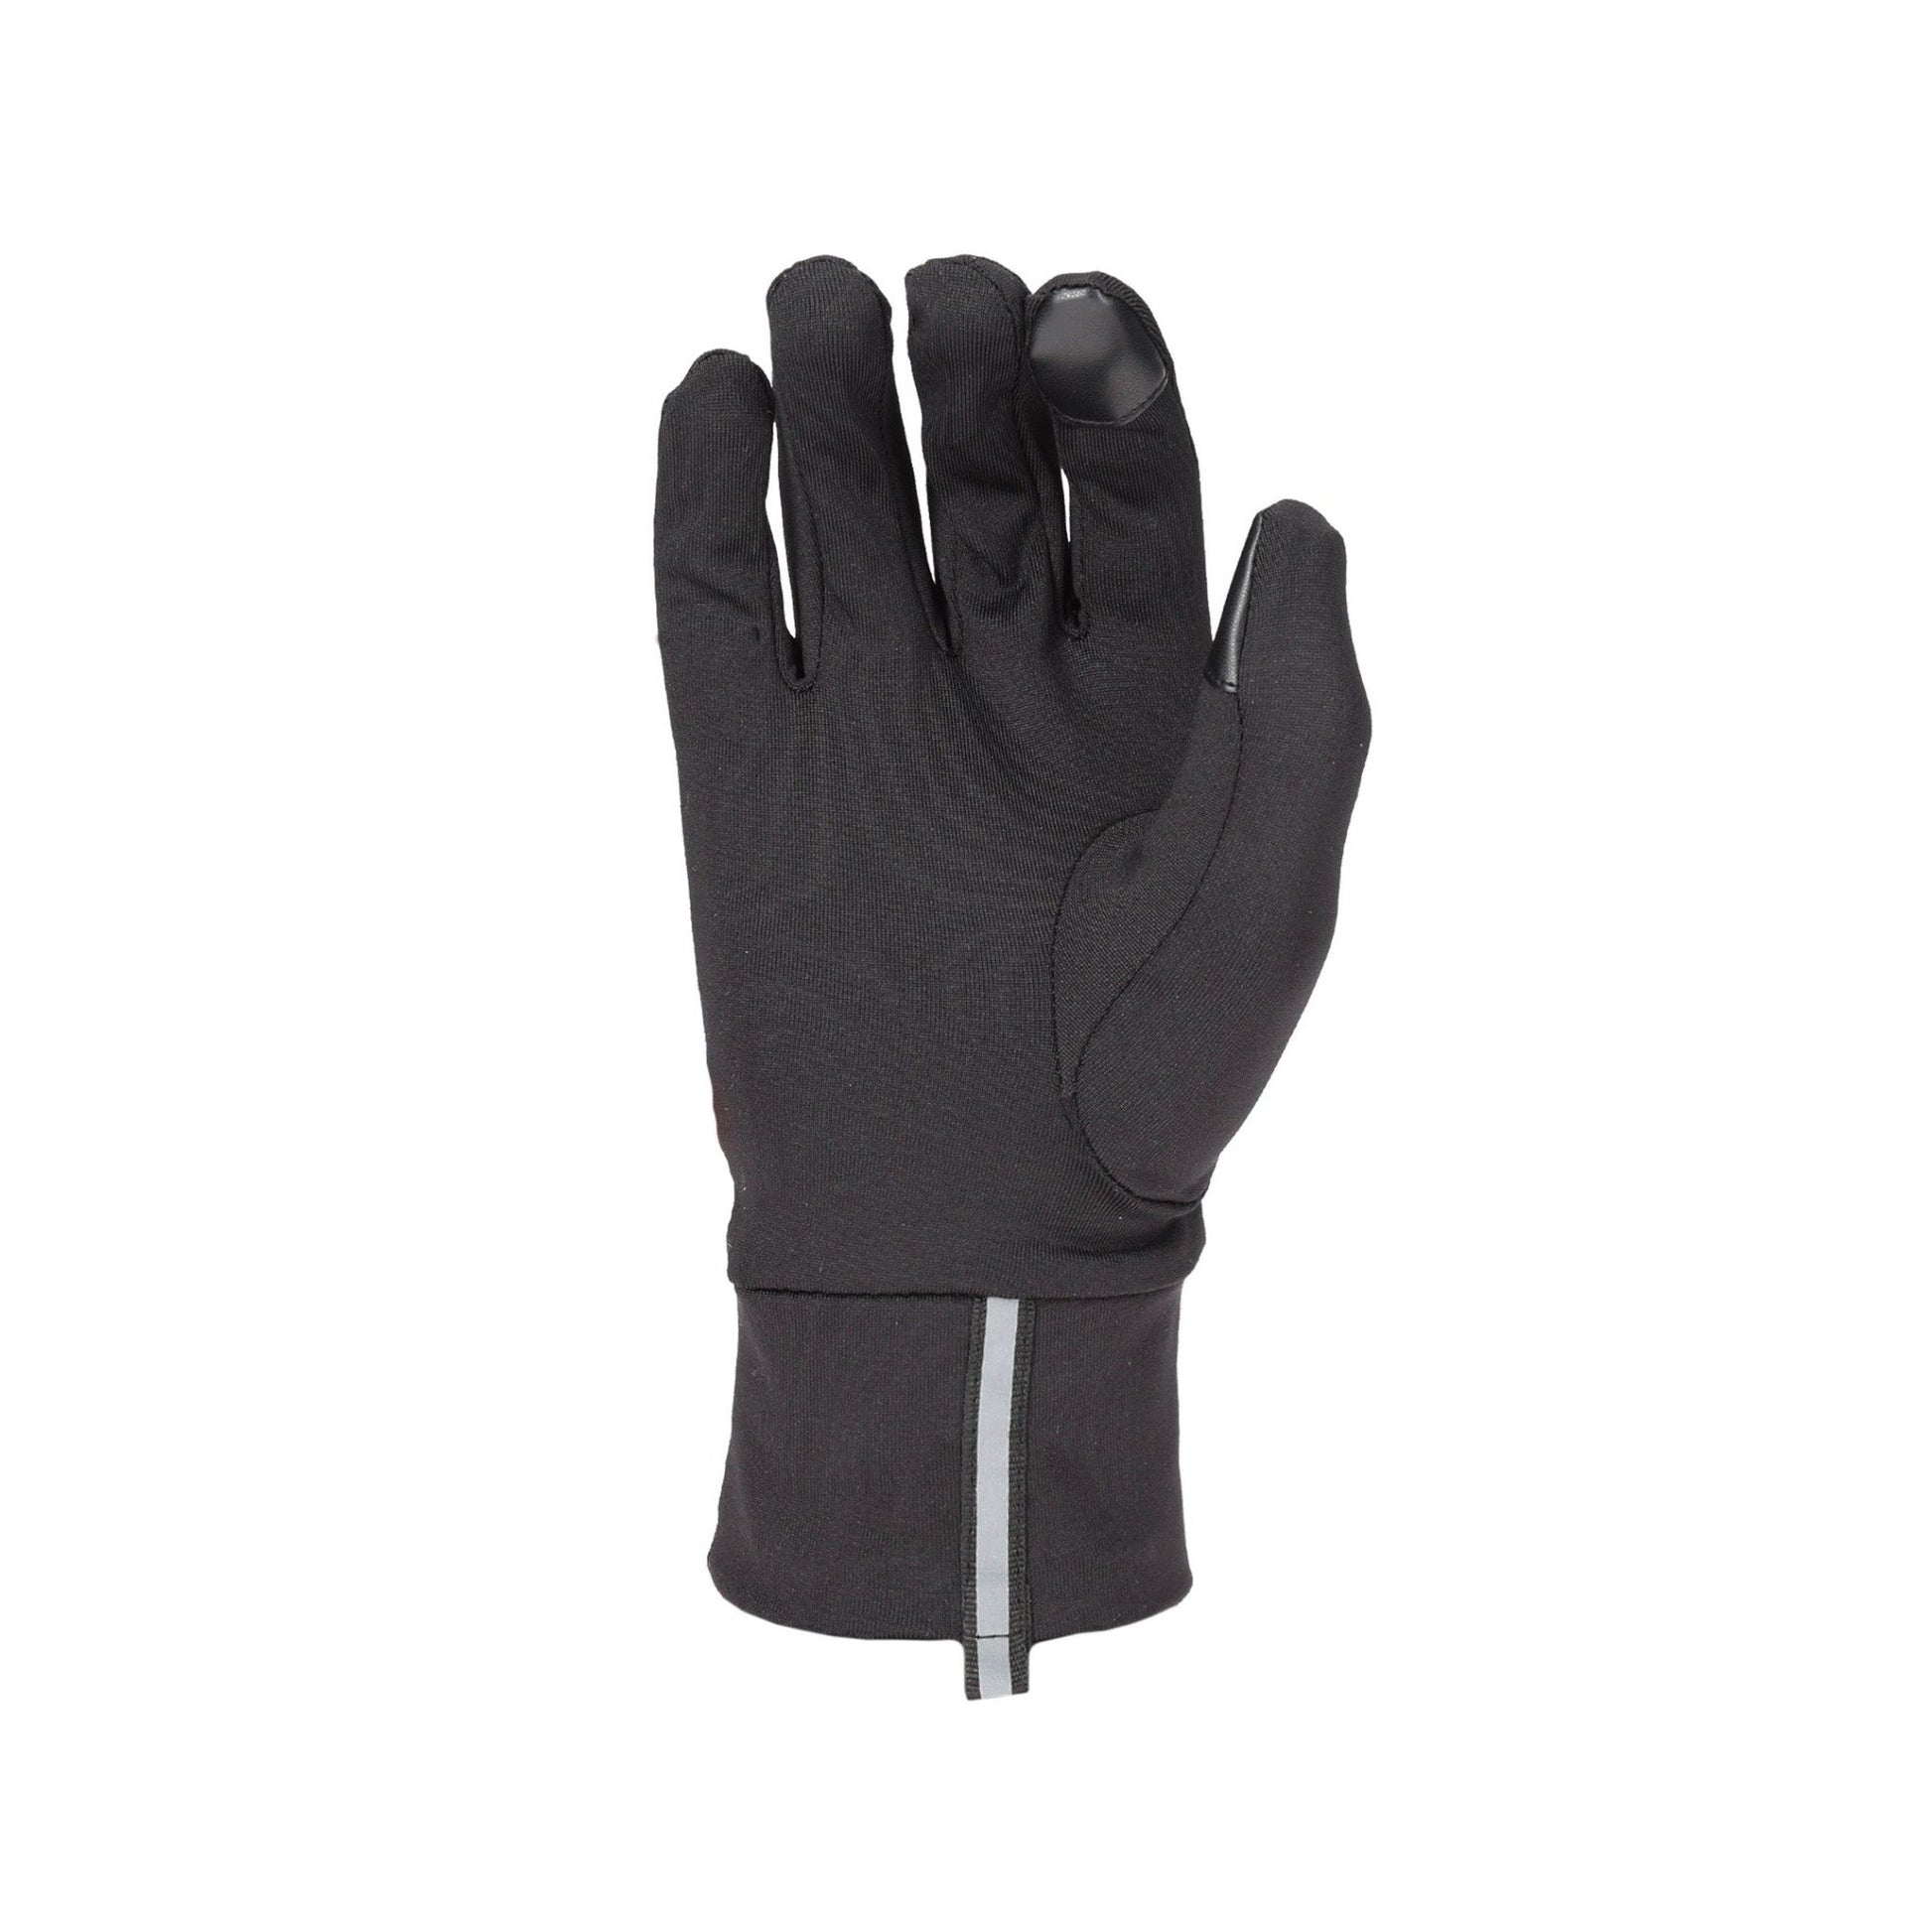 CTR All-Stretch Liner Glove Style:1501